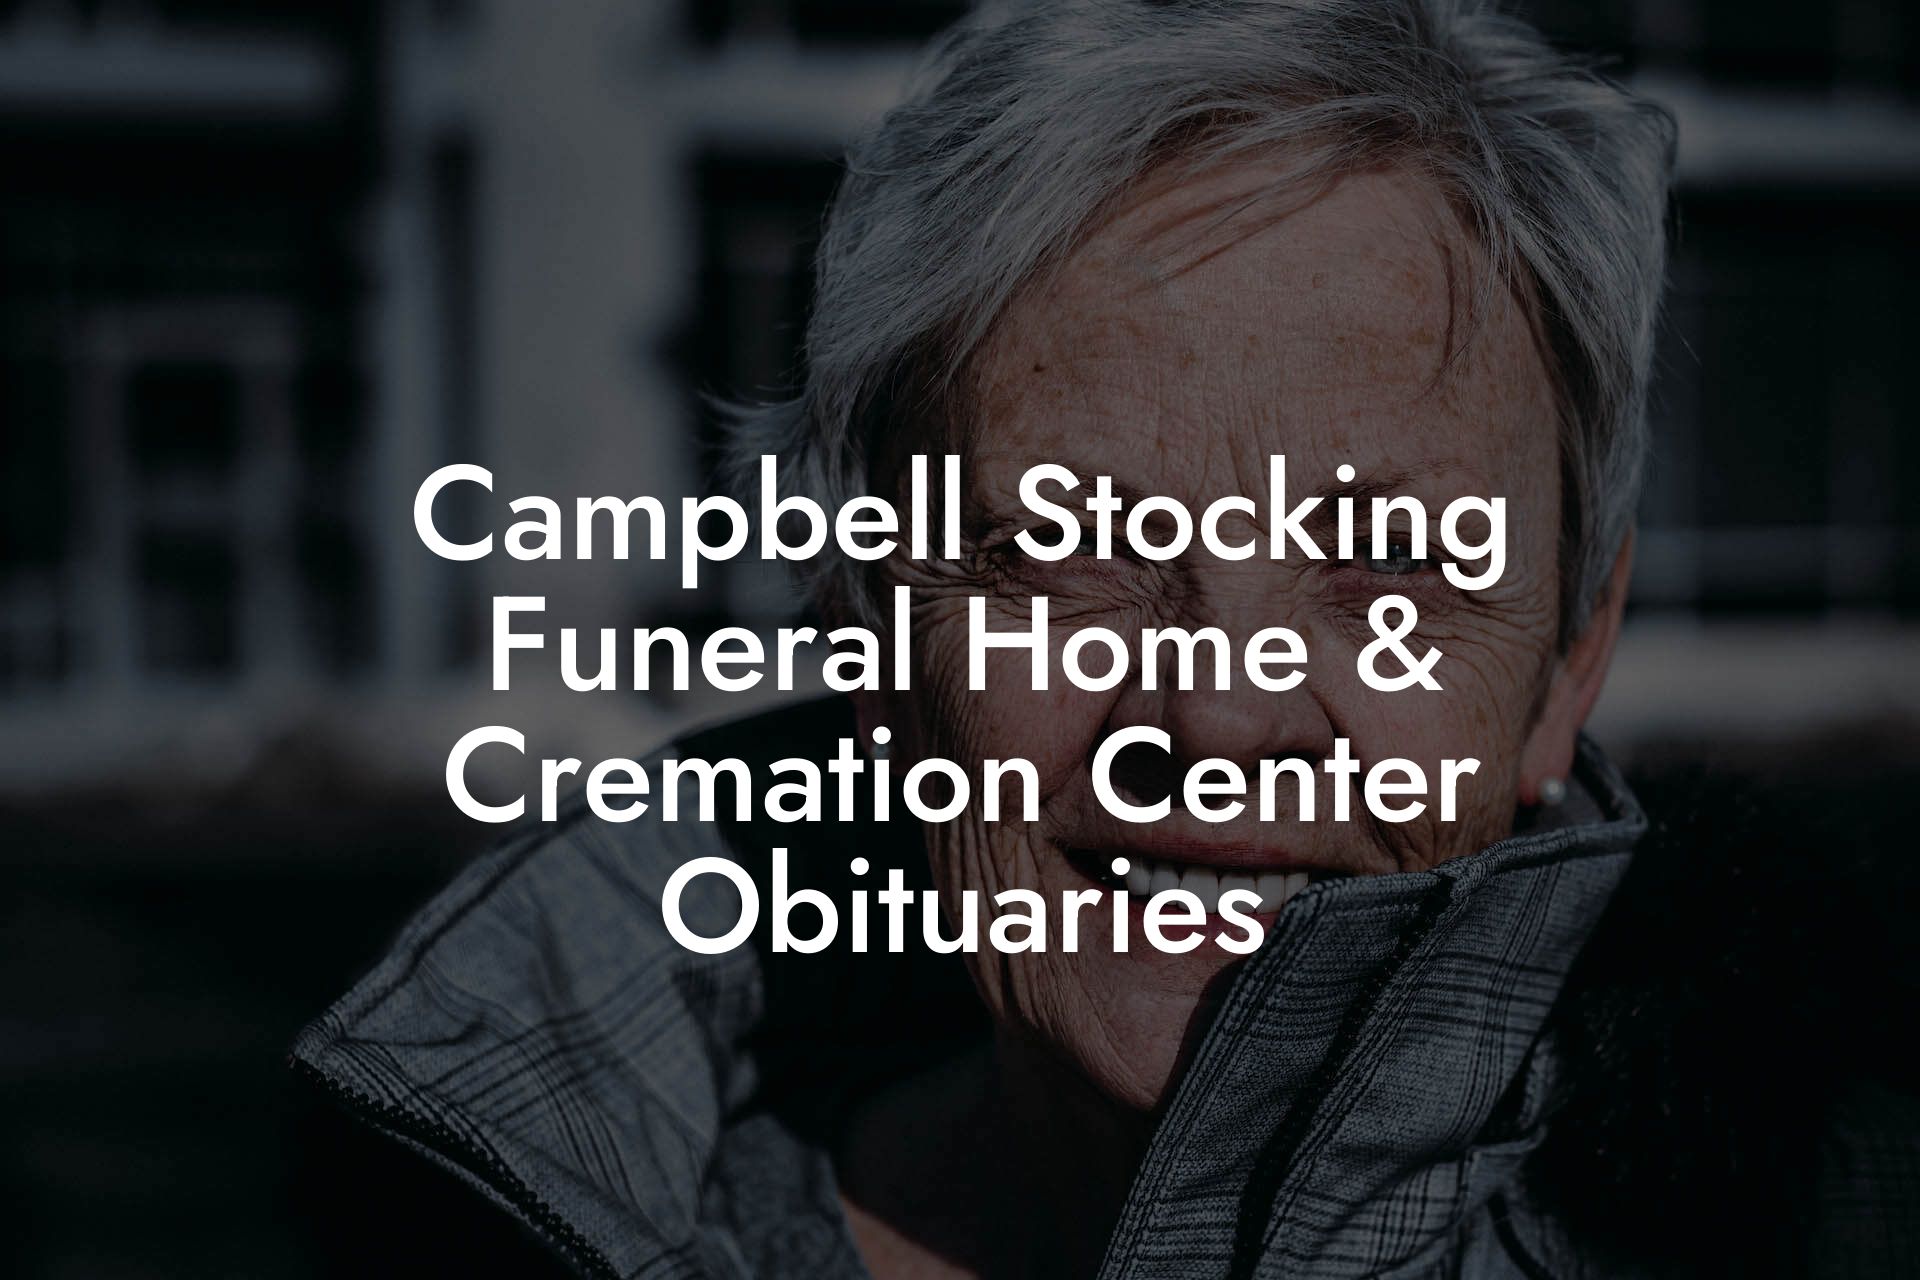 Campbell Stocking Funeral Home & Cremation Center Obituaries